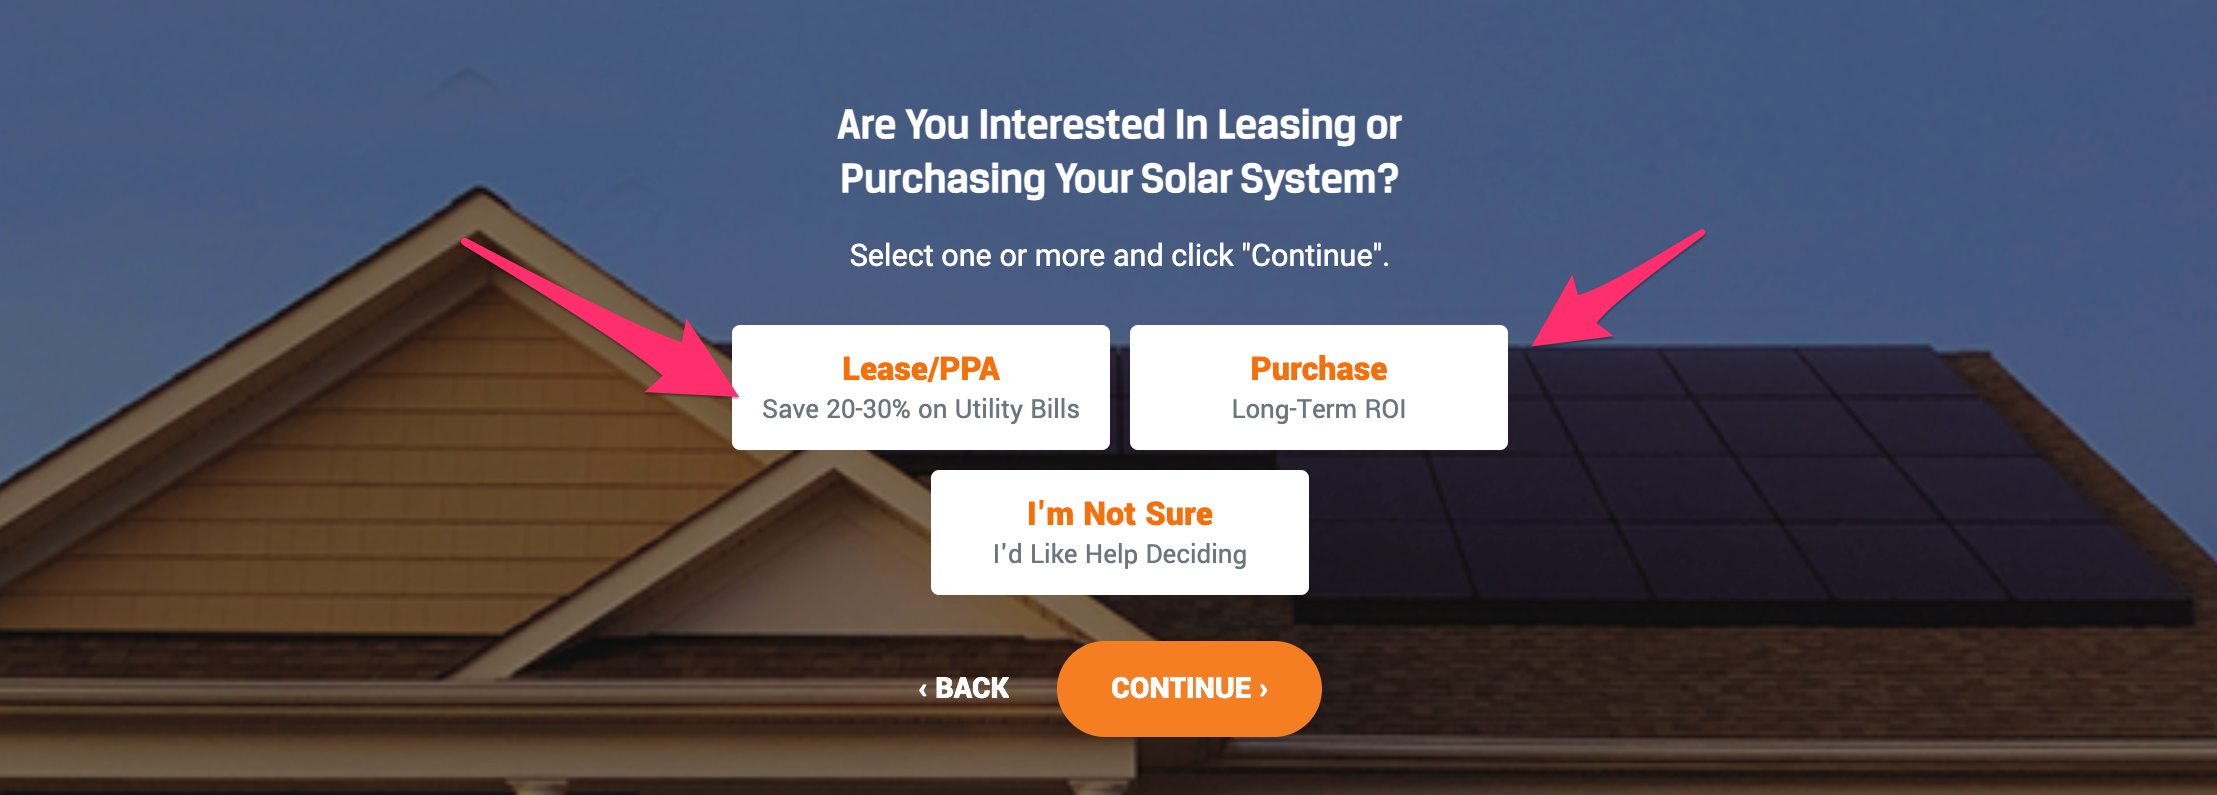 solar lead form template that qualifies the prospect on leasing options 